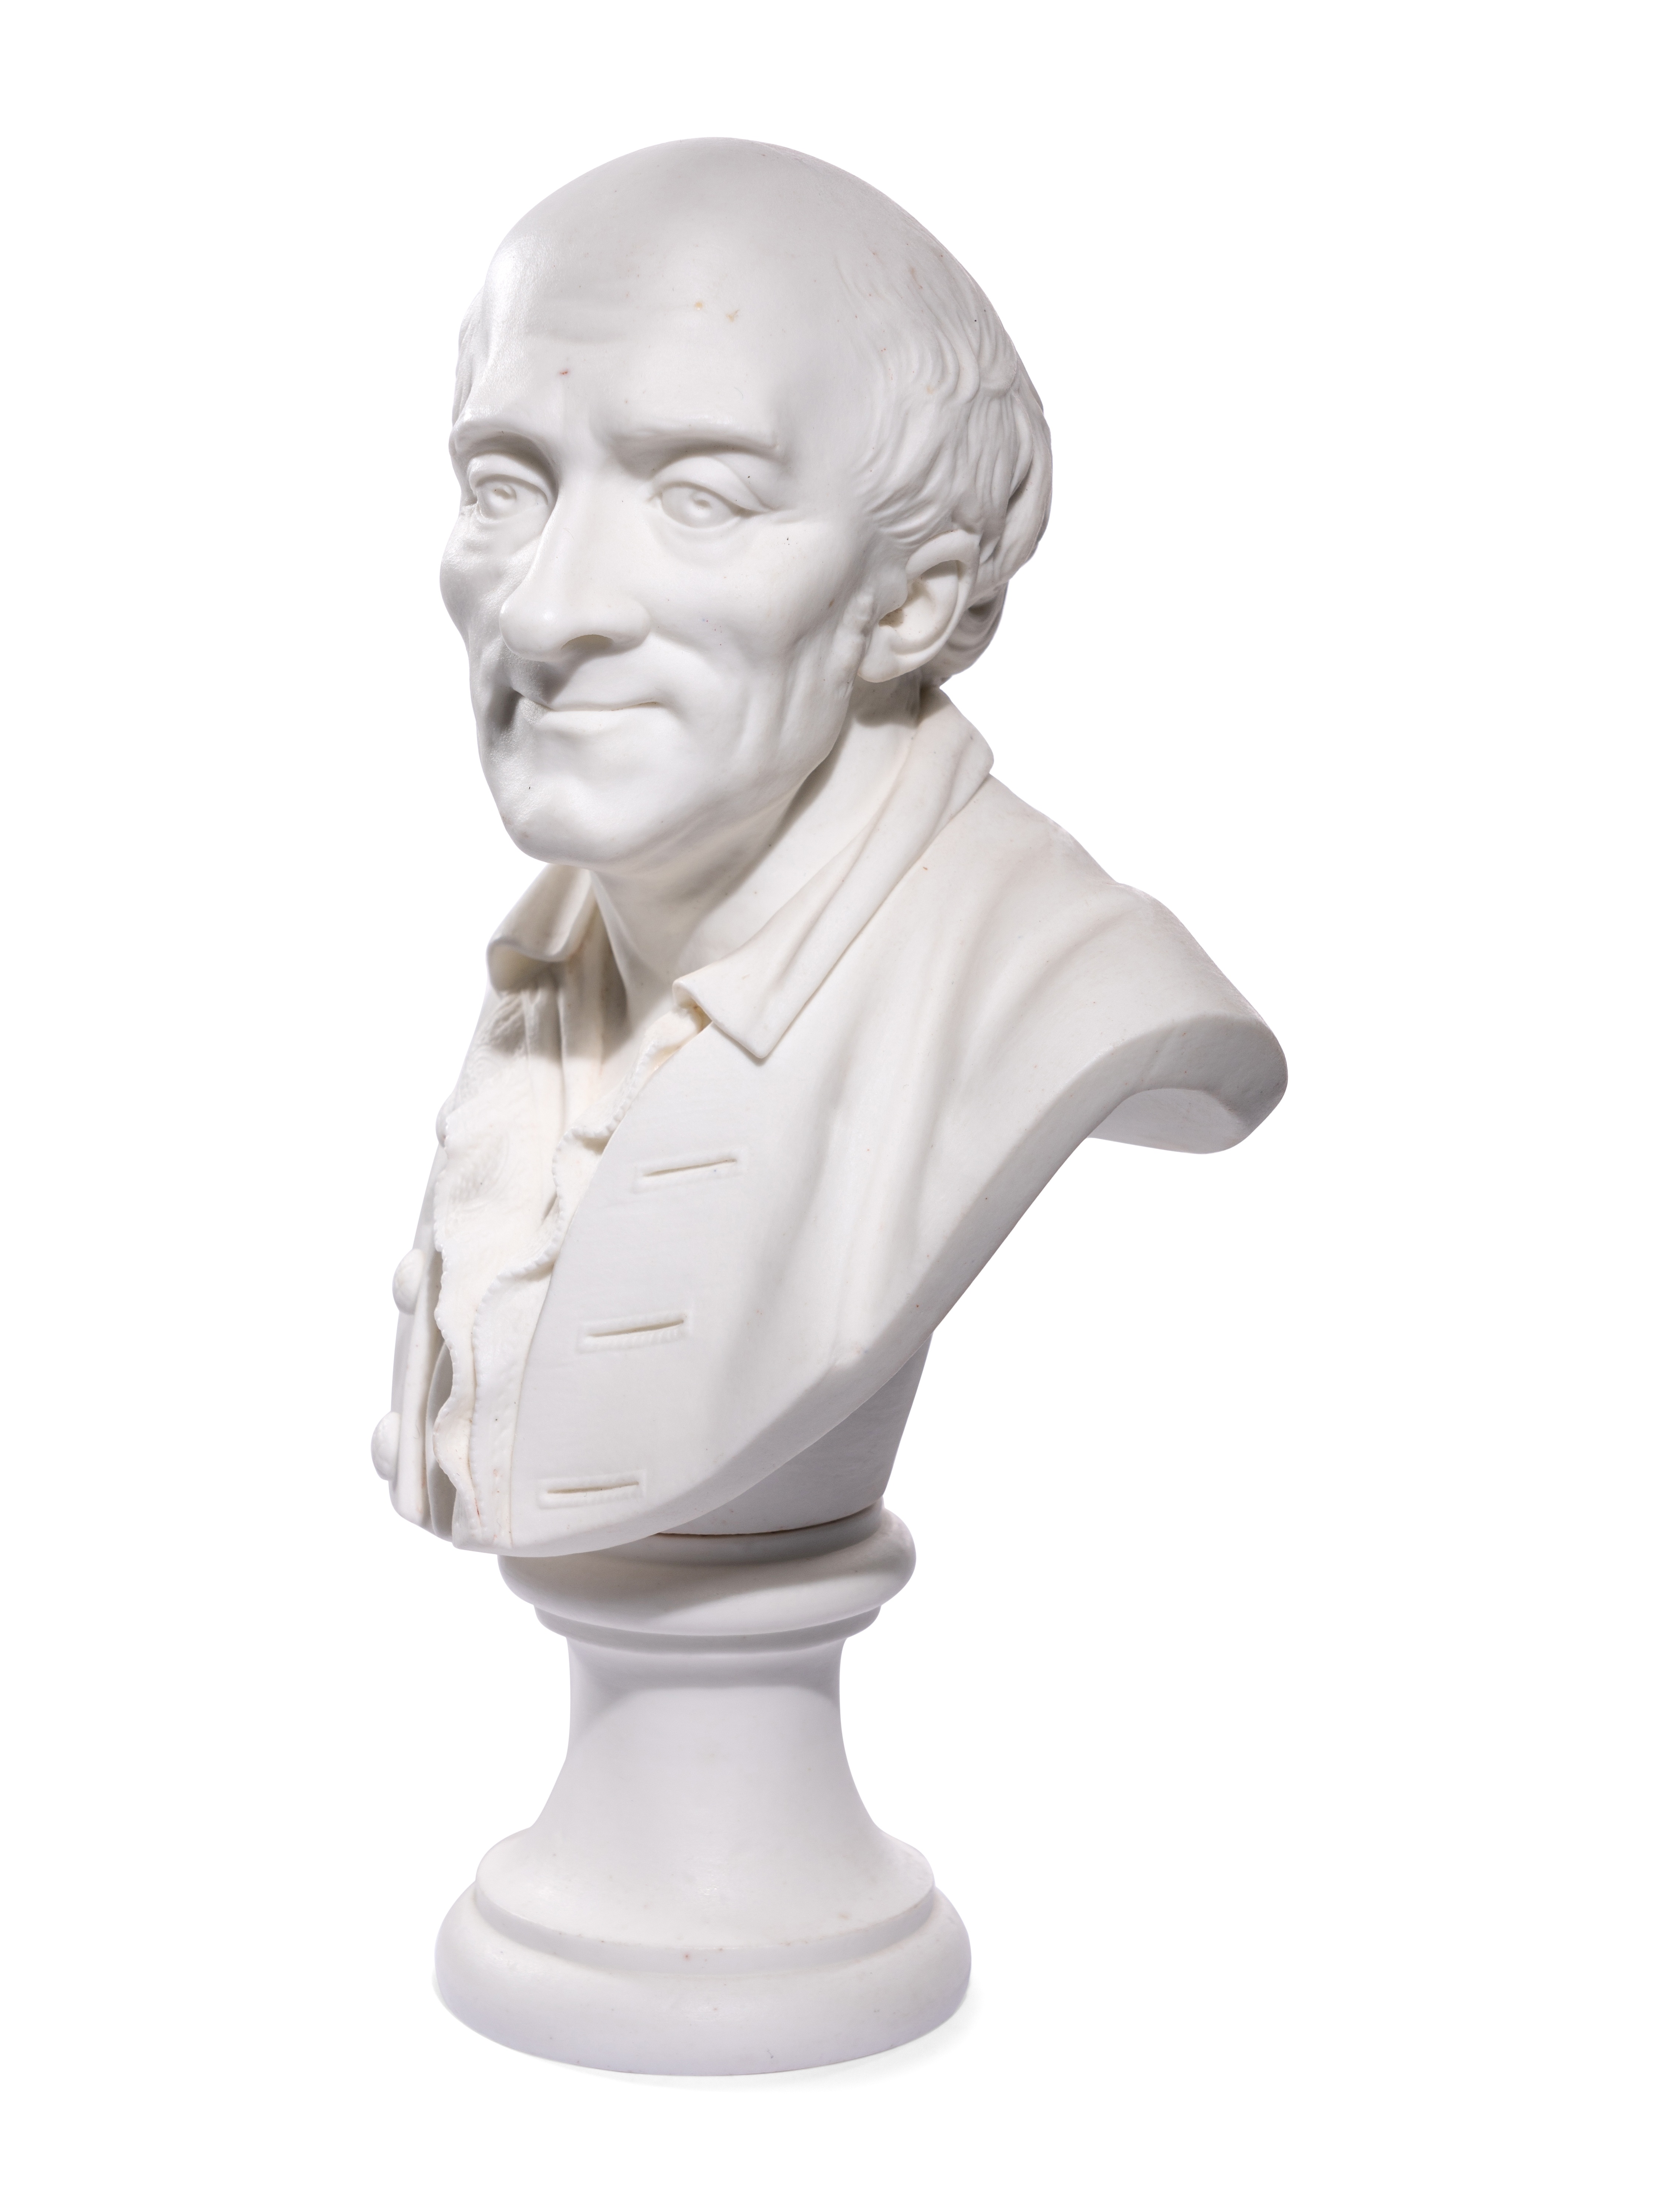 A French Biscuit Porcelain Bust of Fran'cois-Marie Arouet, Called Voltaire - Image 4 of 20